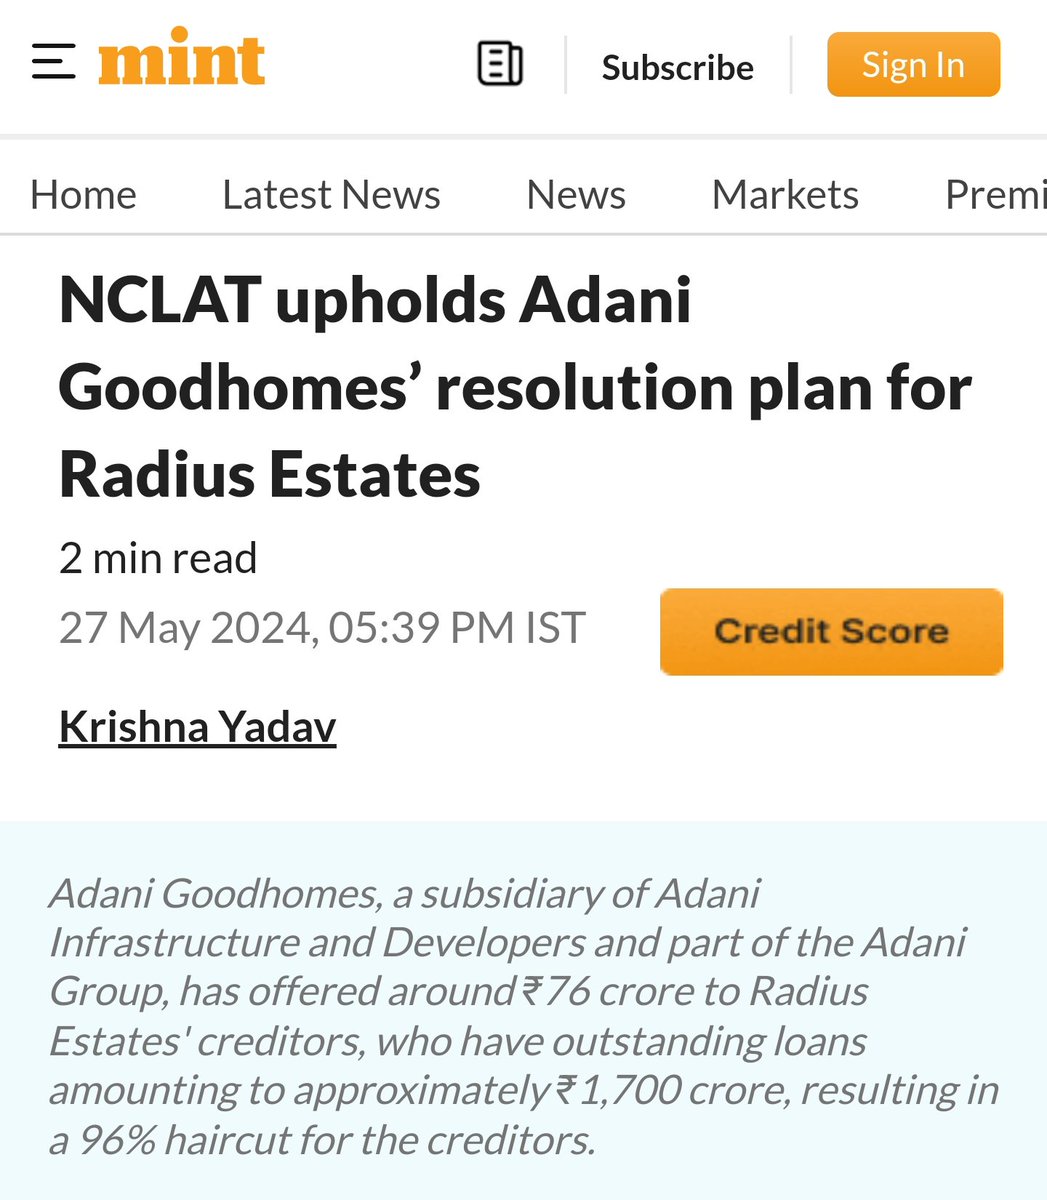 Adani Goodhomes is buying the real estate company Radius Estates for ₹76 crores. The company has outstanding loans of approximately ₹1,700 crore. A 96% loan write-off has been approved overruling banks' objection. #Modani ease of doing business! Listen to Arun Shourie for more